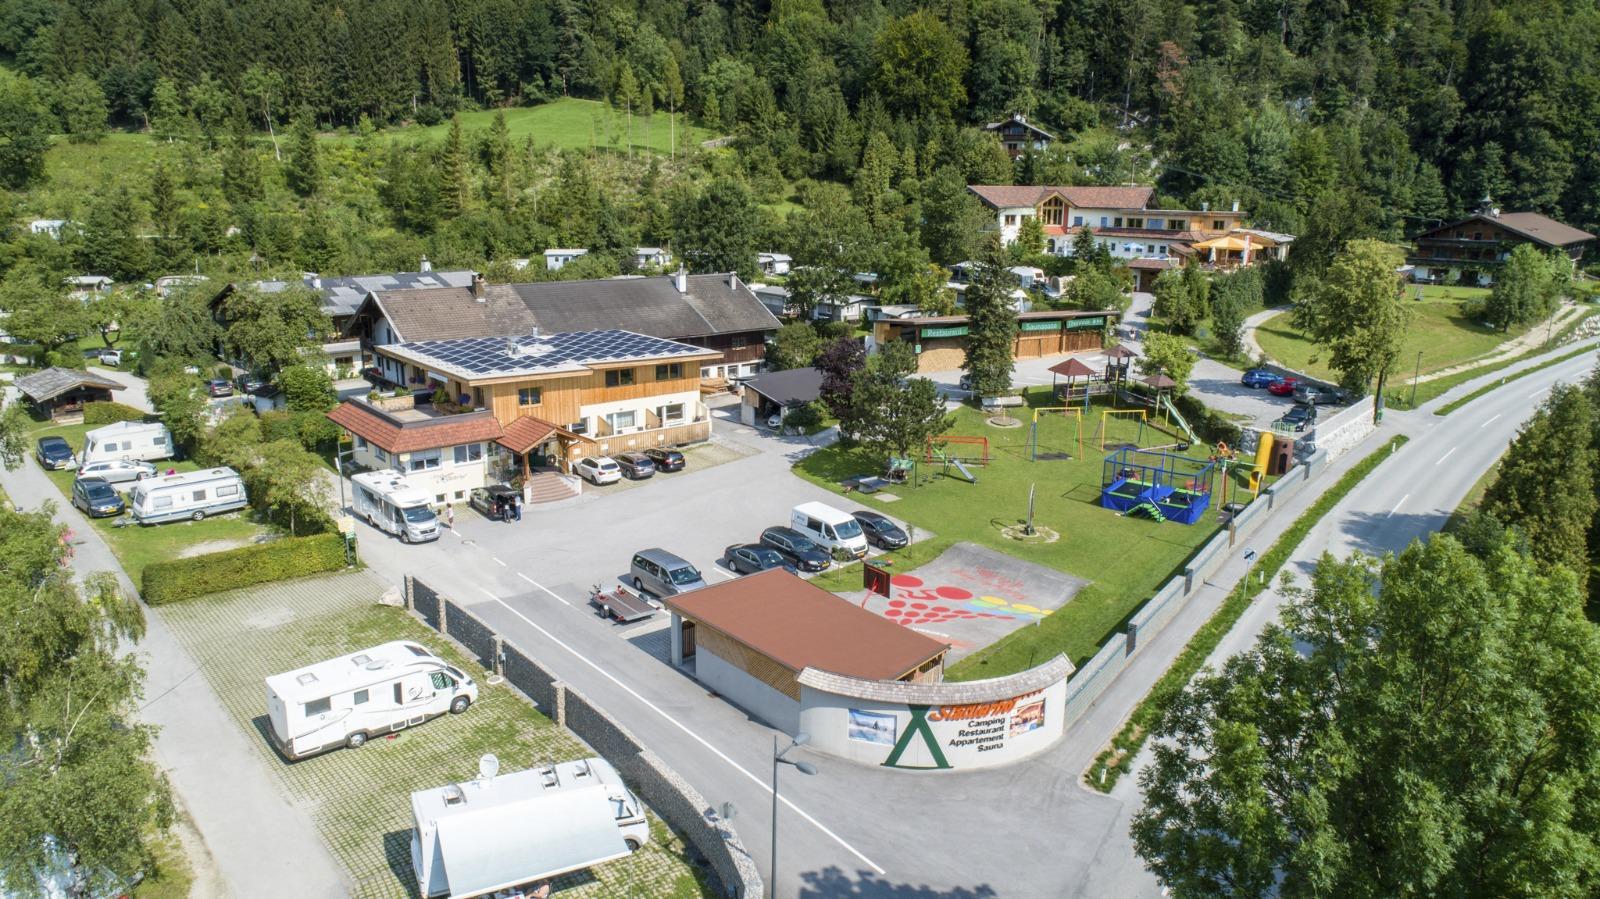 Camping Stadlerhof - a holiday with the Sappl family at the foot of the Alps – image 1